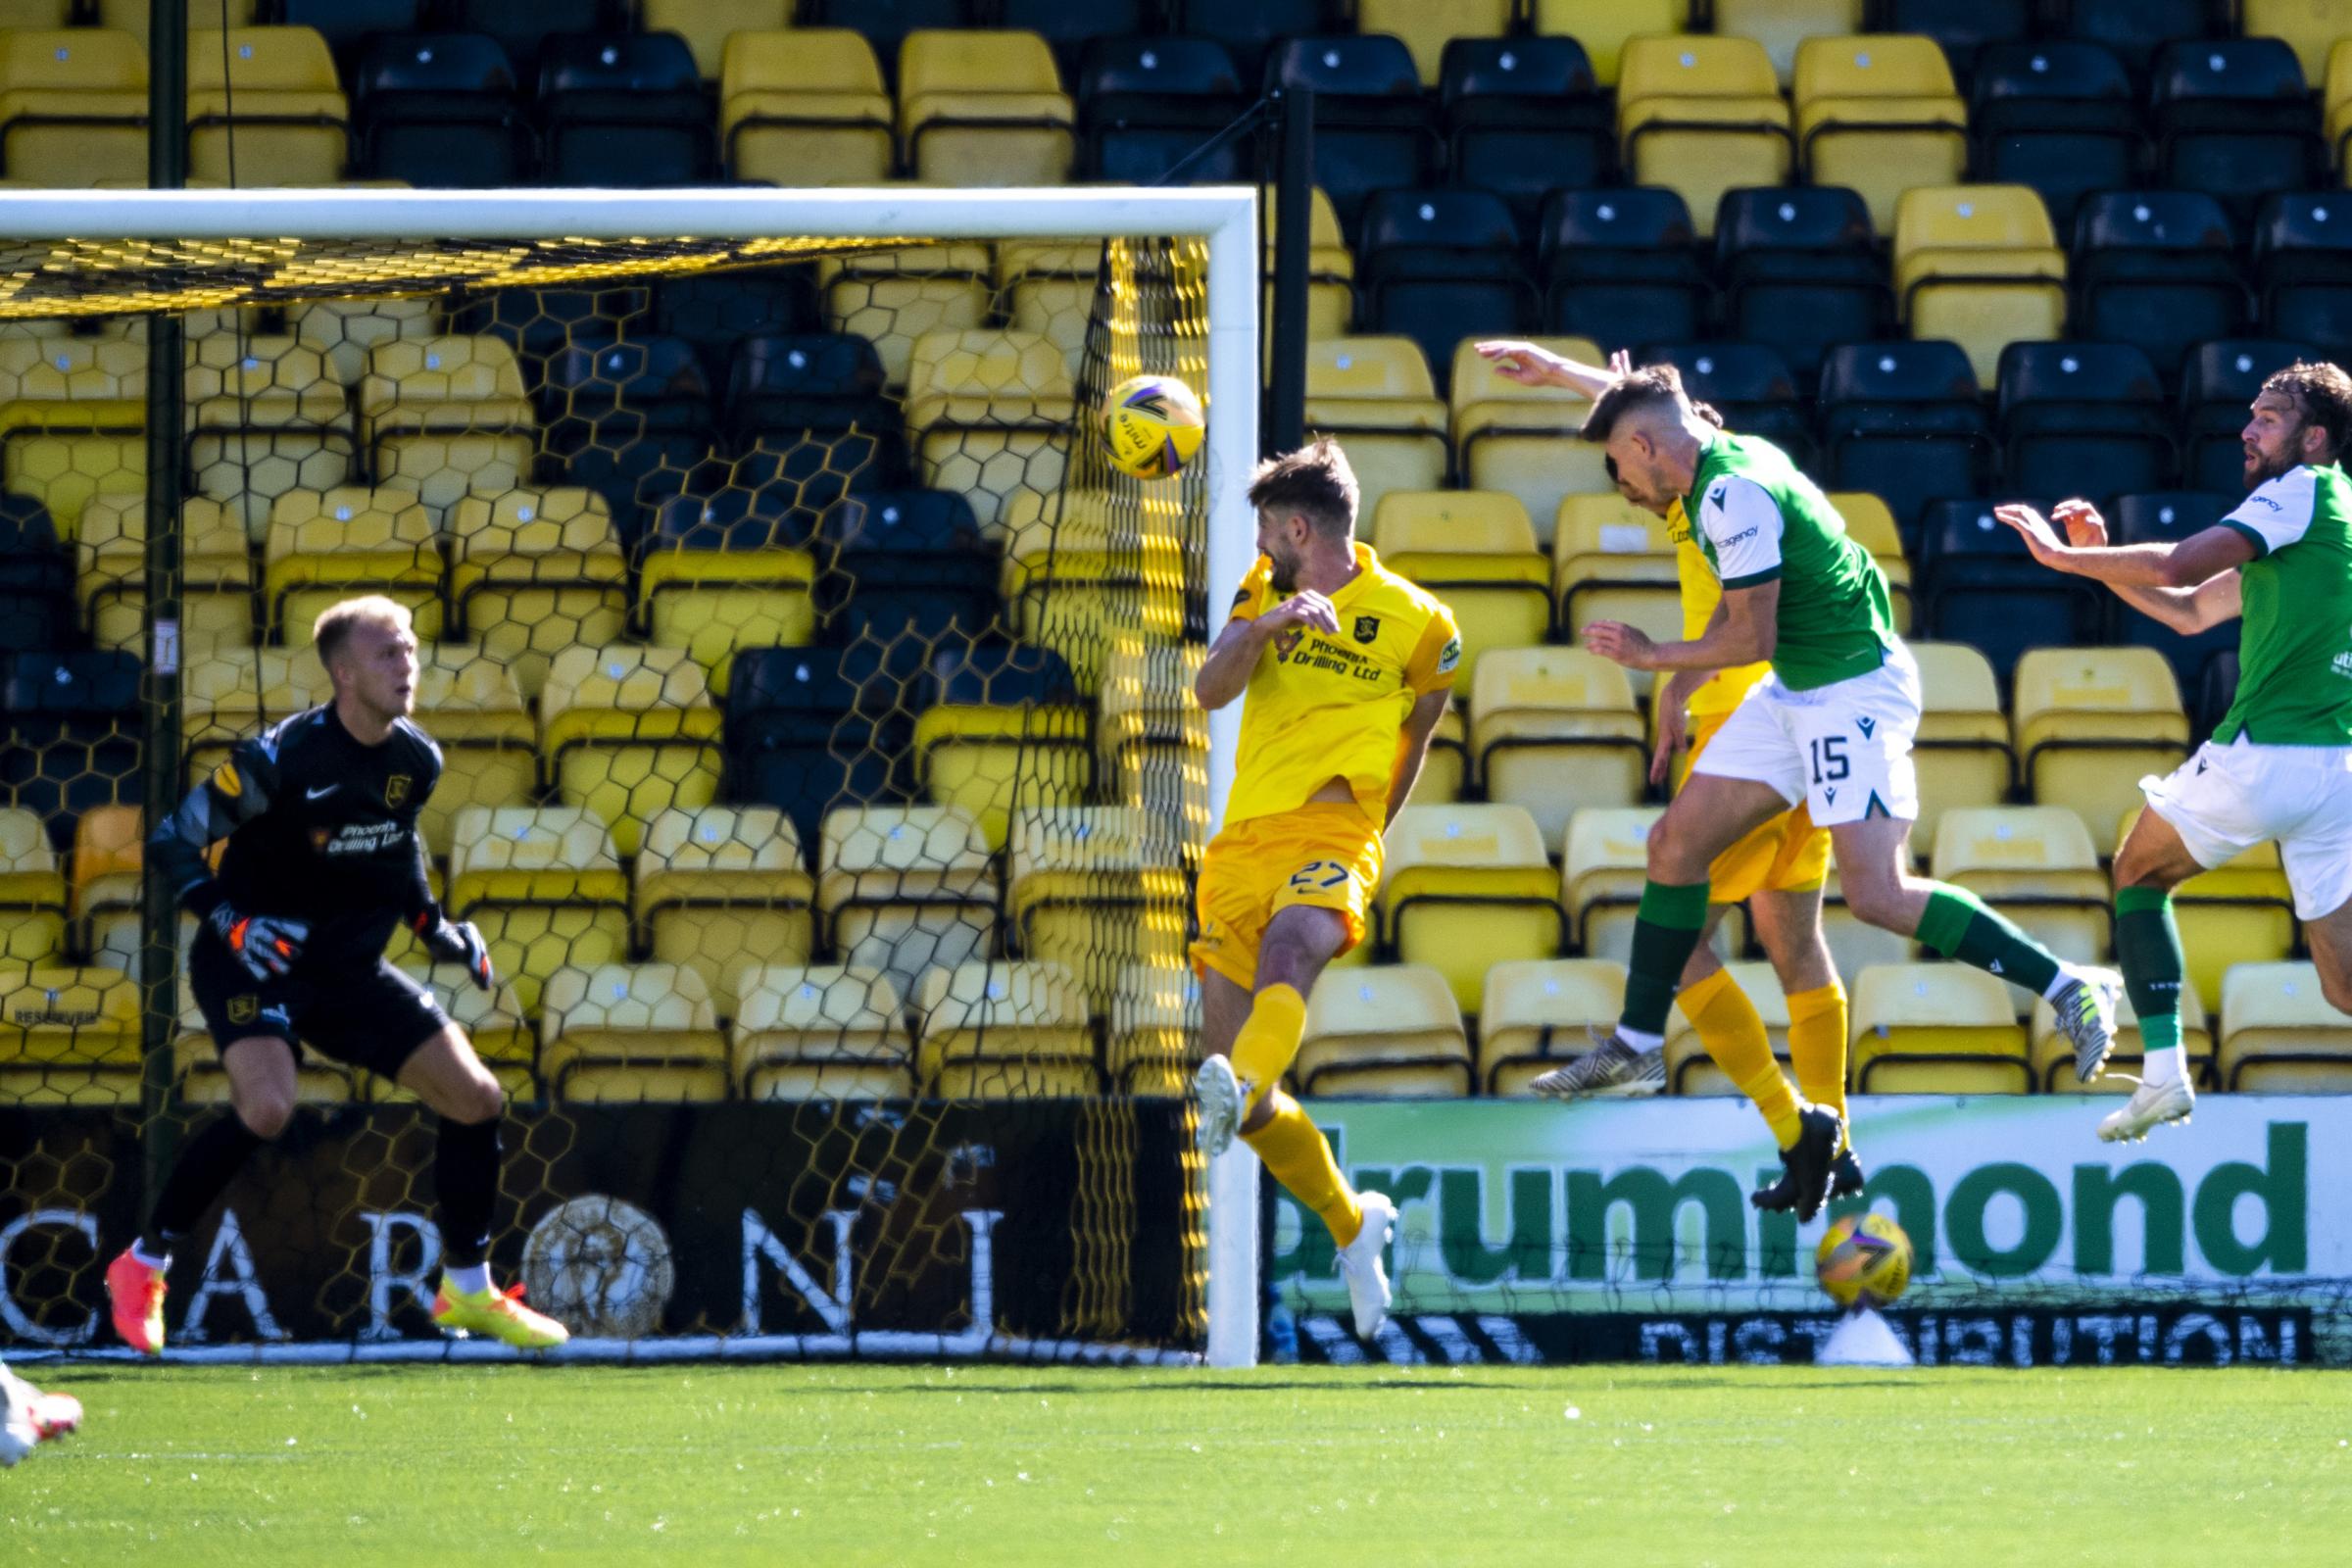 Livingston 1 Hibernian 4: Hosts made to suffer as confident Nisbet impresses boss with hat-trick